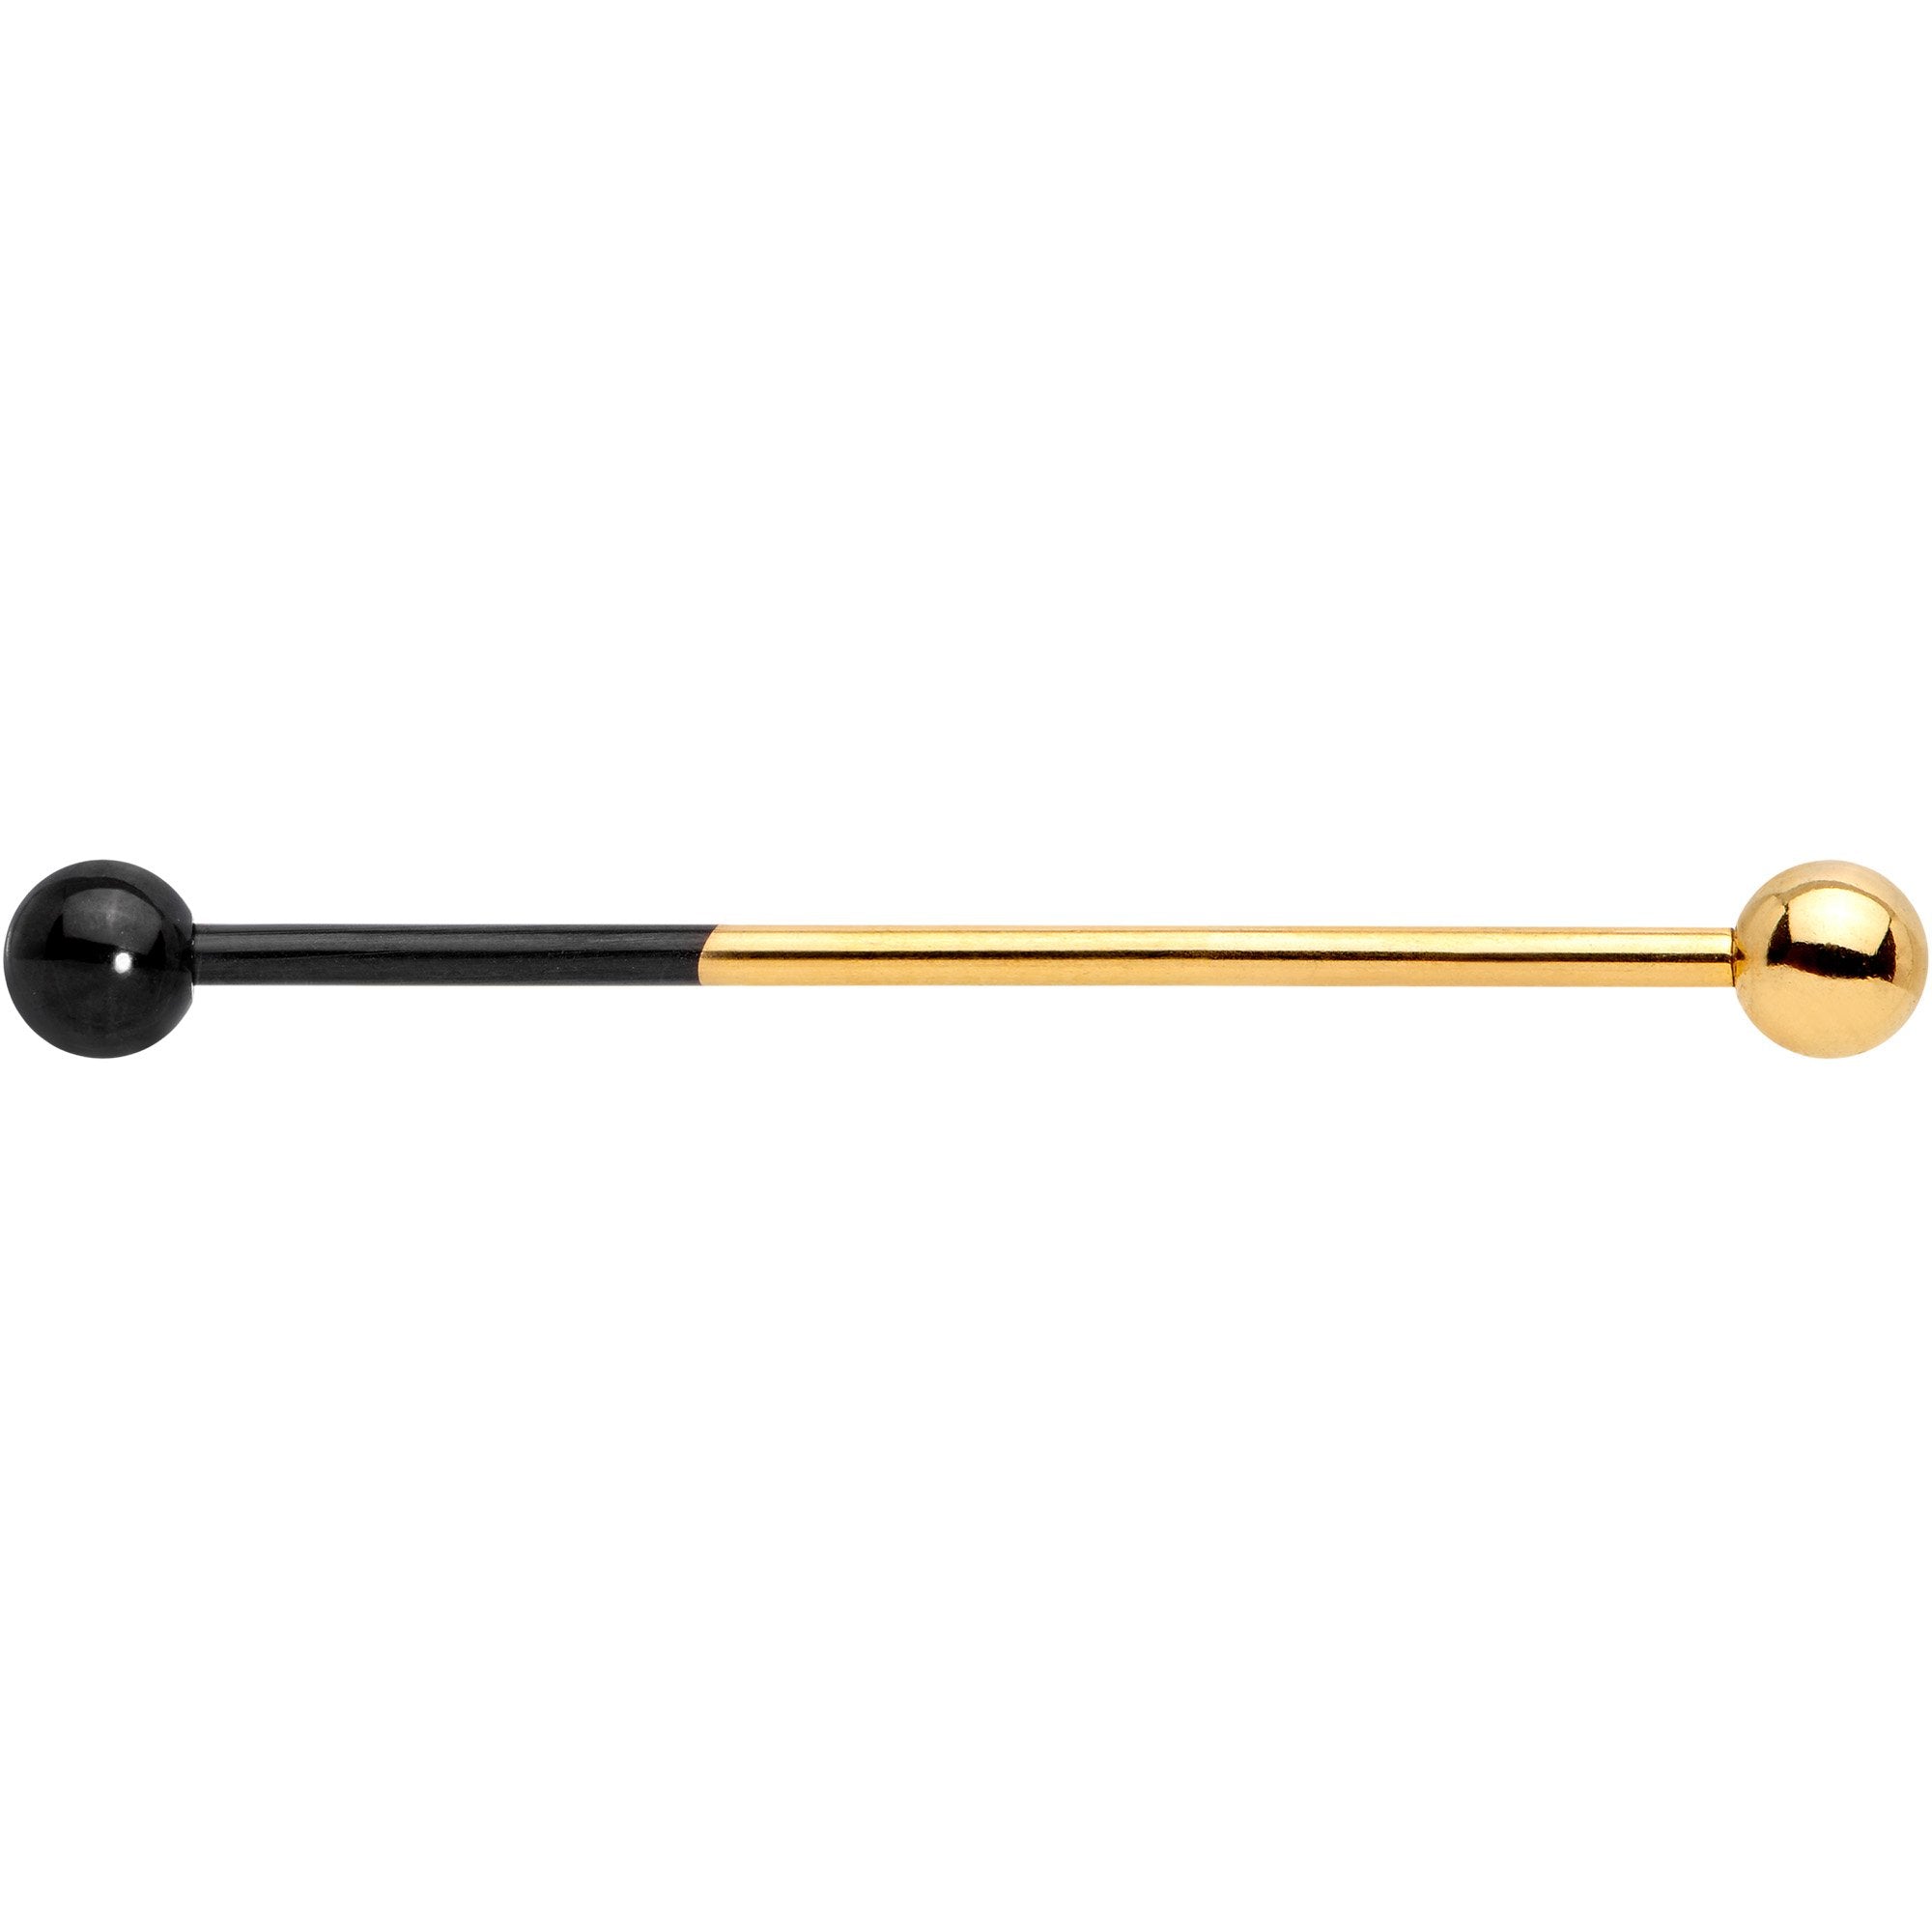 14 Gauge Black and Gold Tone Two Tone Industrial Barbell 38mm